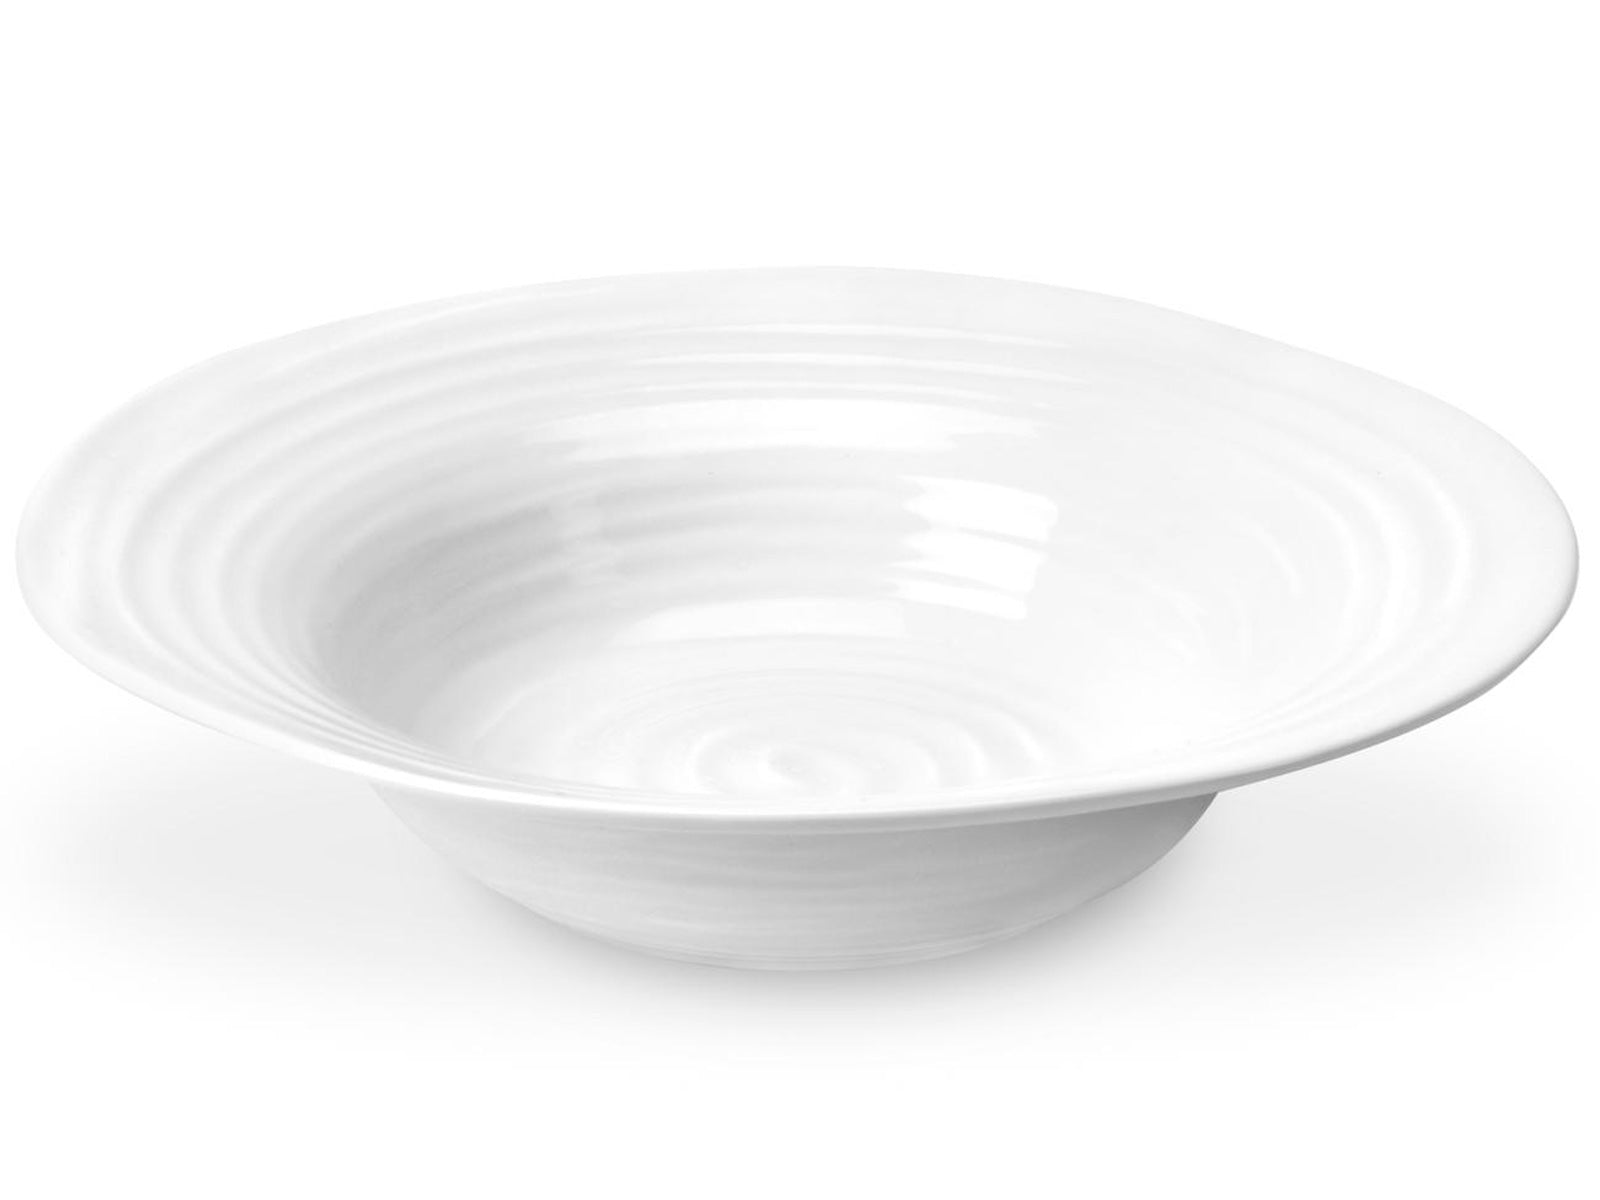 A wide-rimmed bowl made of textured white porcelain